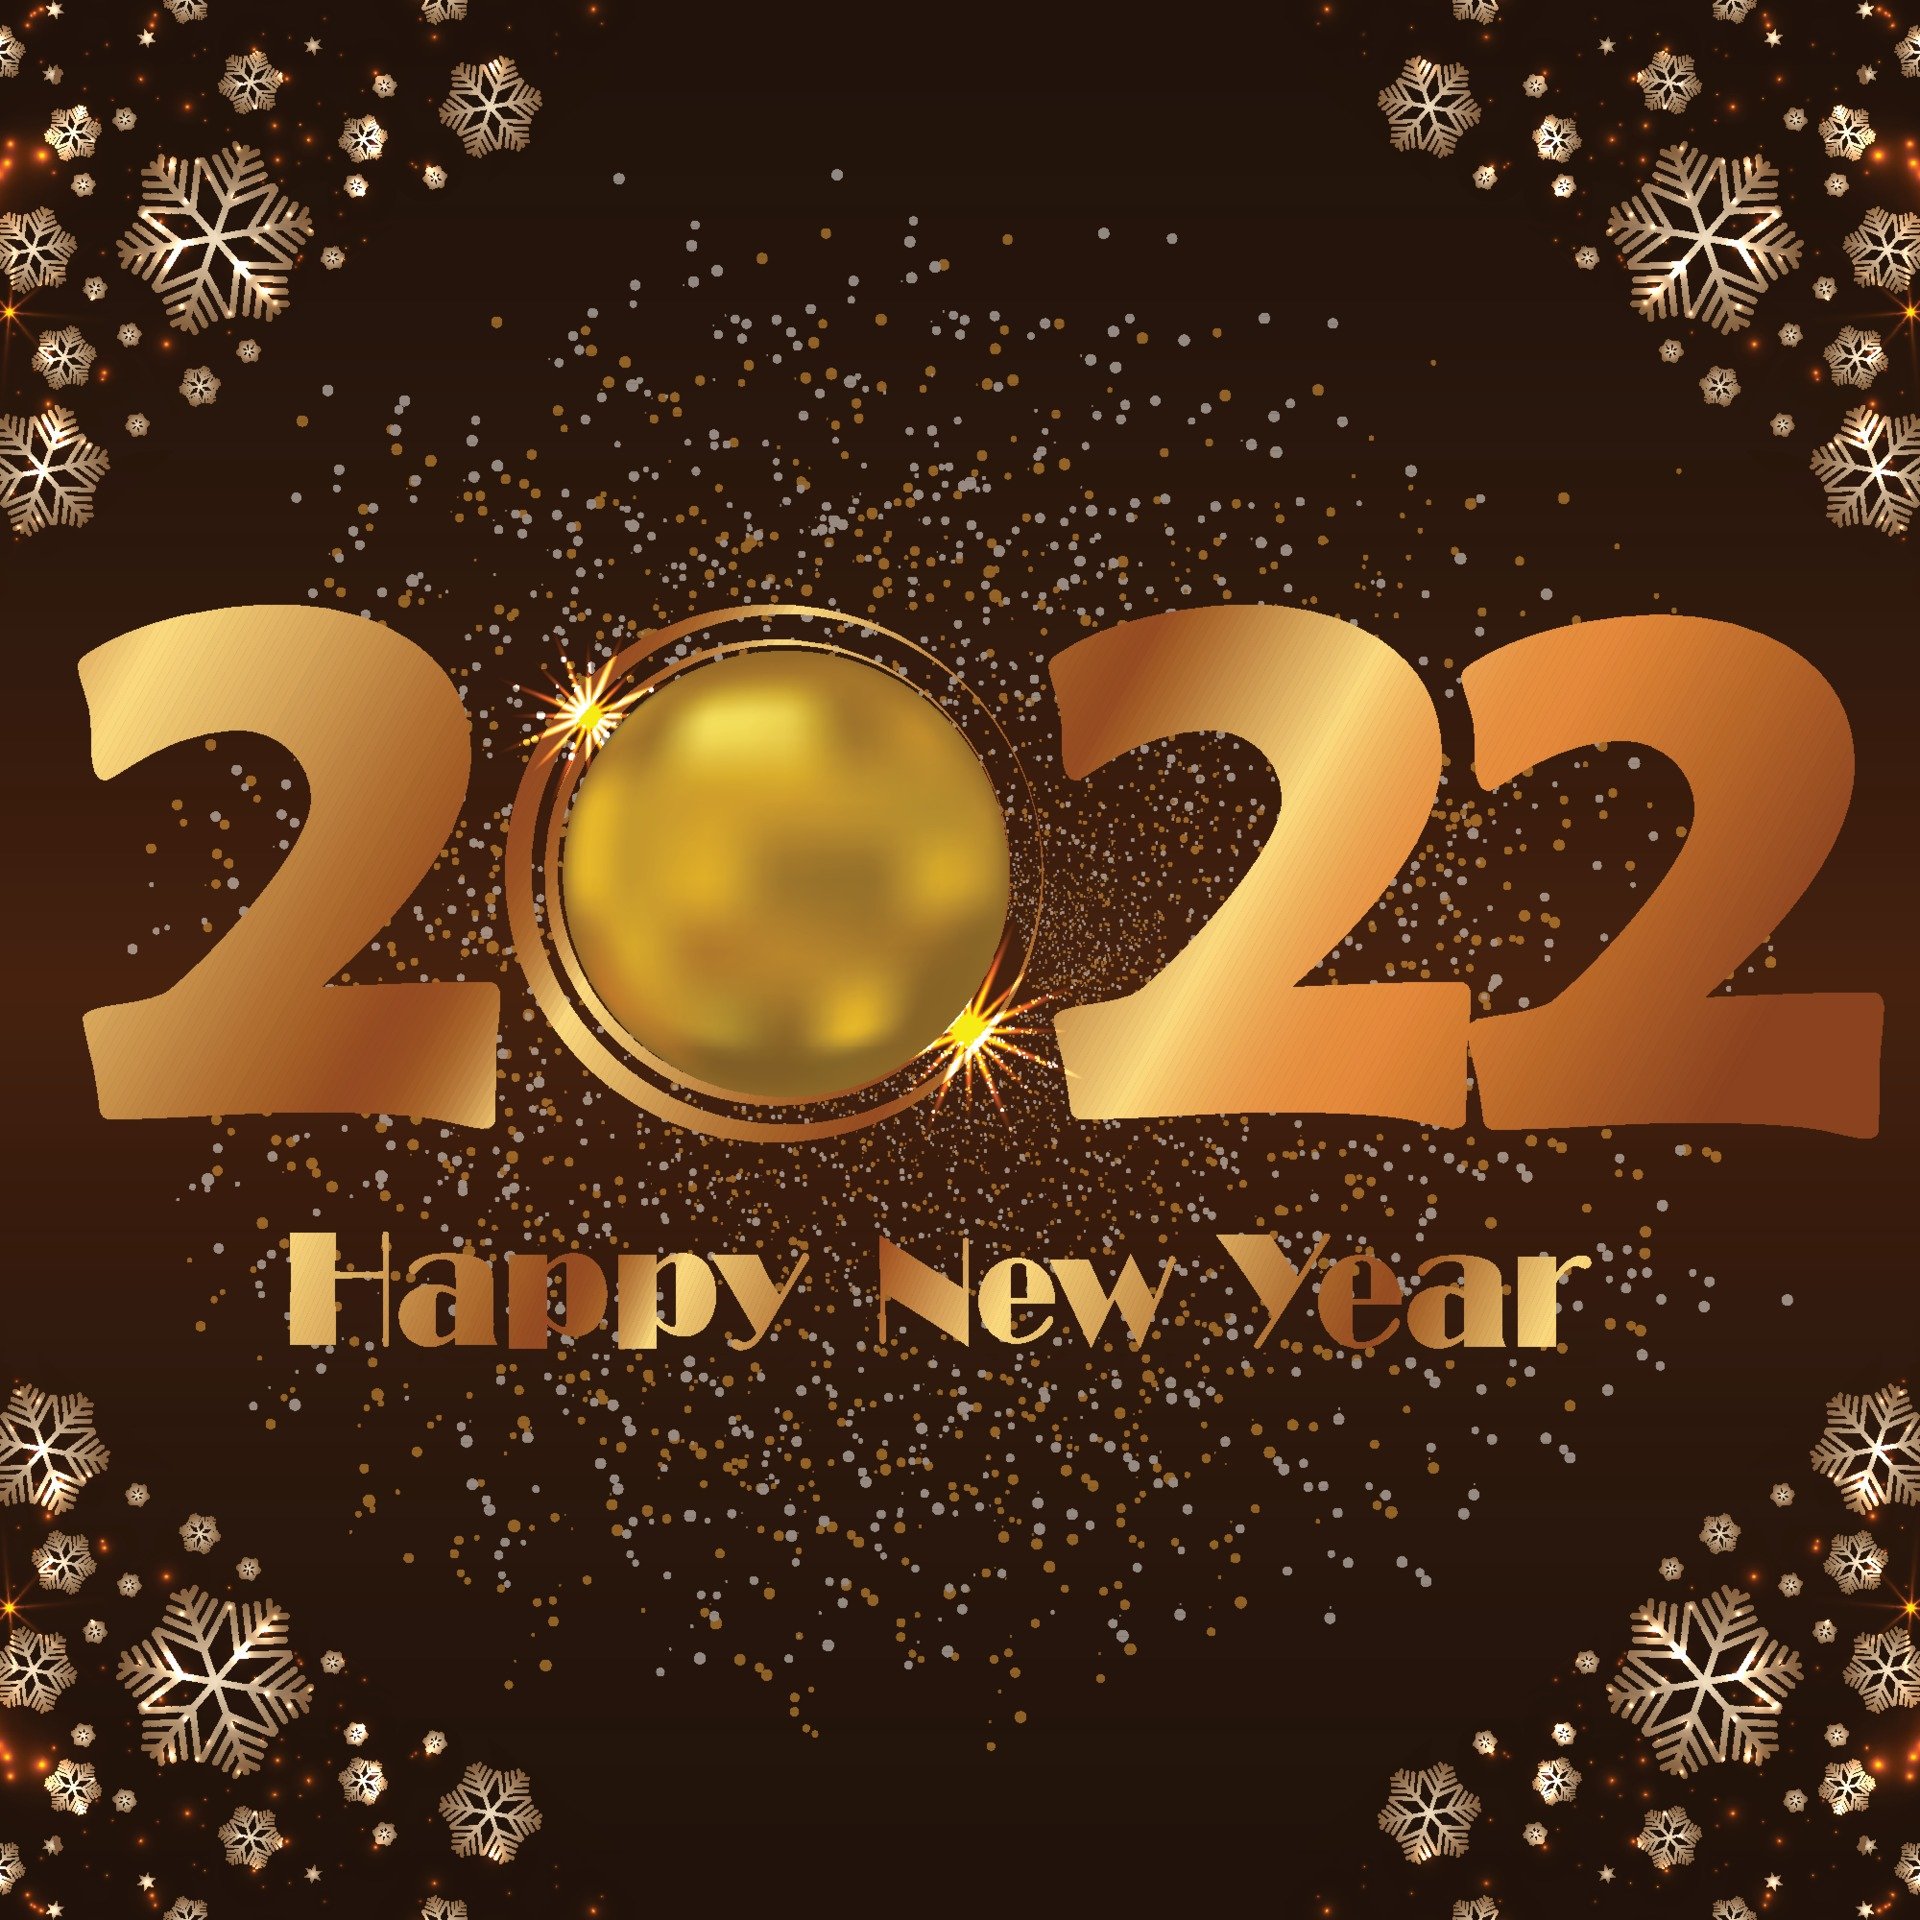 Wallpapers congratulations on the year 2022 new year new year 2022 on the desktop